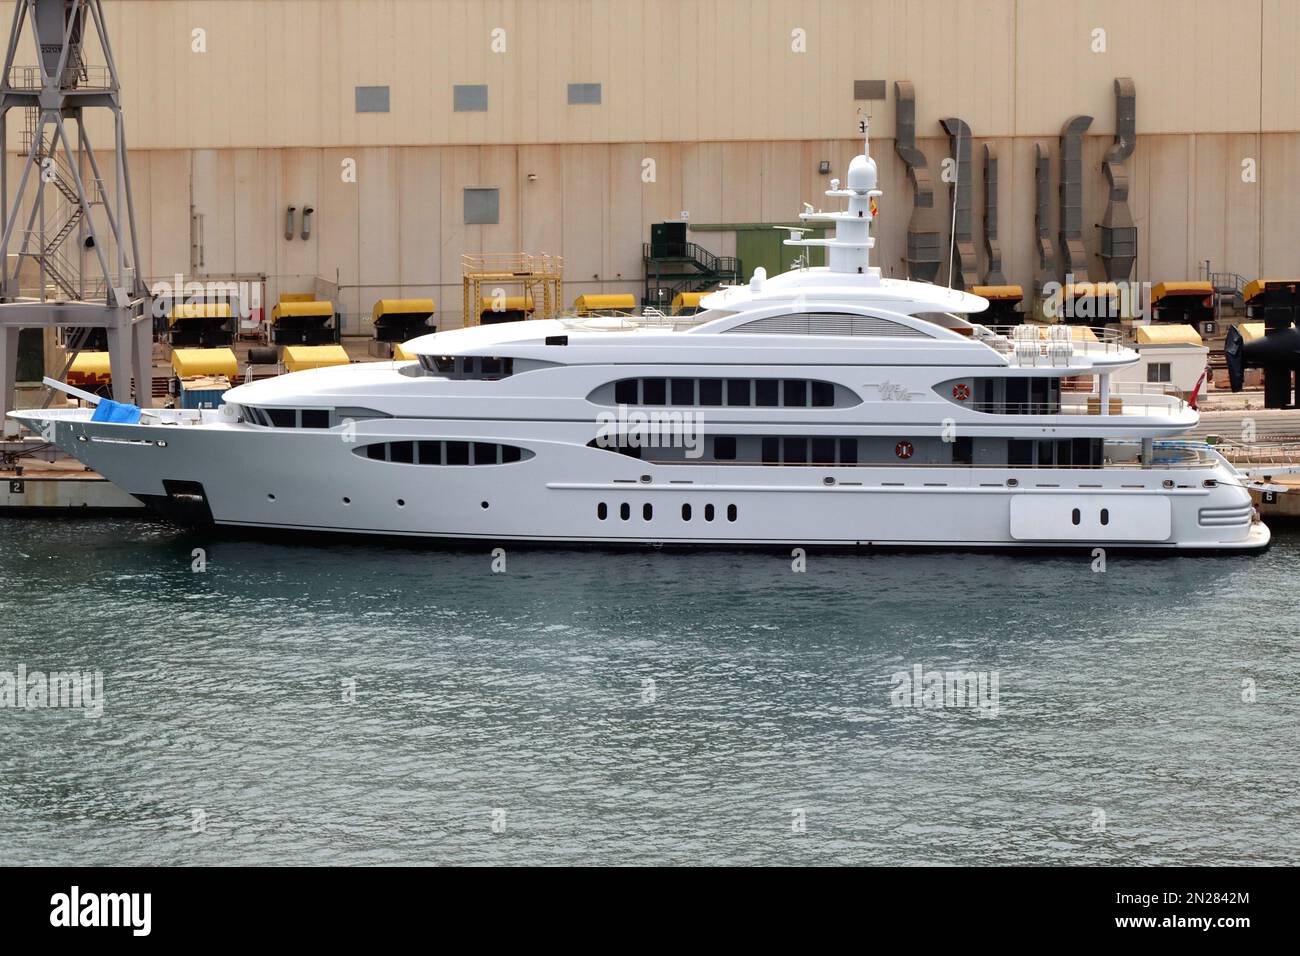 High end luxury Superyacht “Vive la Vie” owned by Swiss billionaire Willy Michel, moored at the Navantia Servicing Facility, Cartagena, Spain Stock Photo